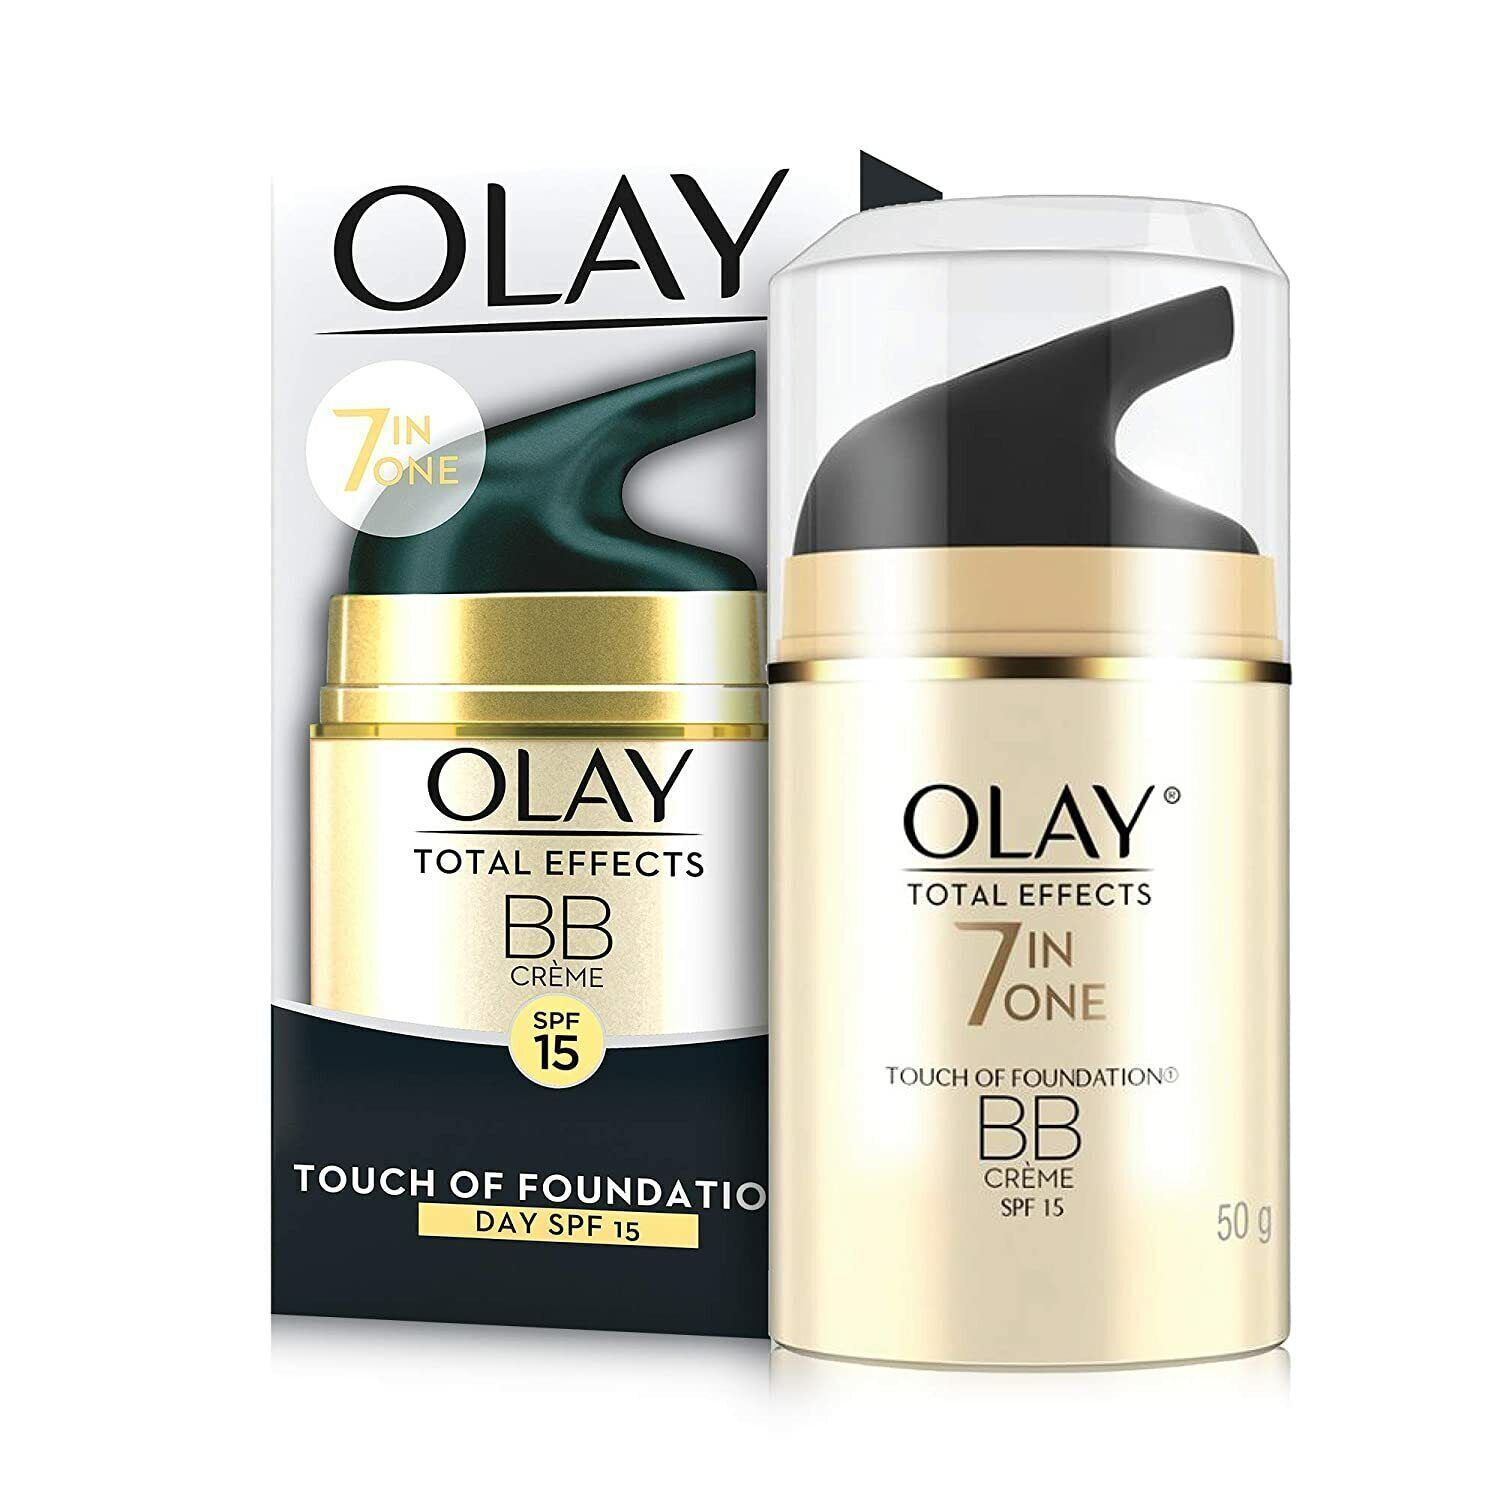 Olay Day Cream Total Effects 7 In 1 BB Cream SPF 15, 50 g - $19.76